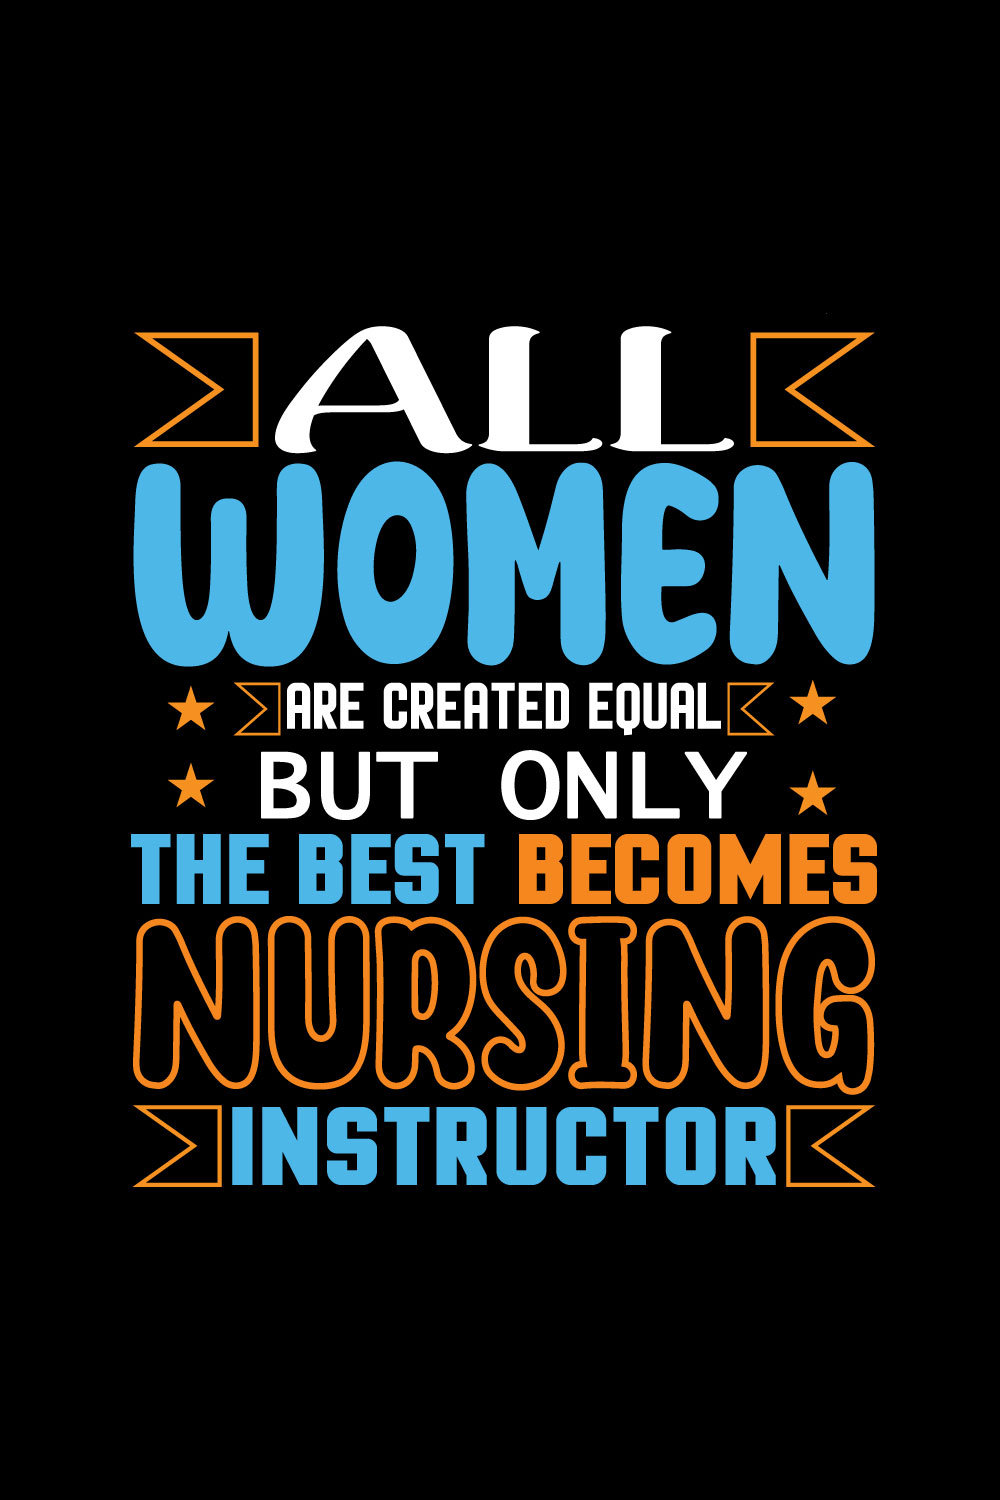 All Women Are Created Equal But Only The Best Becomes Nursing Instructor pinterest preview image.